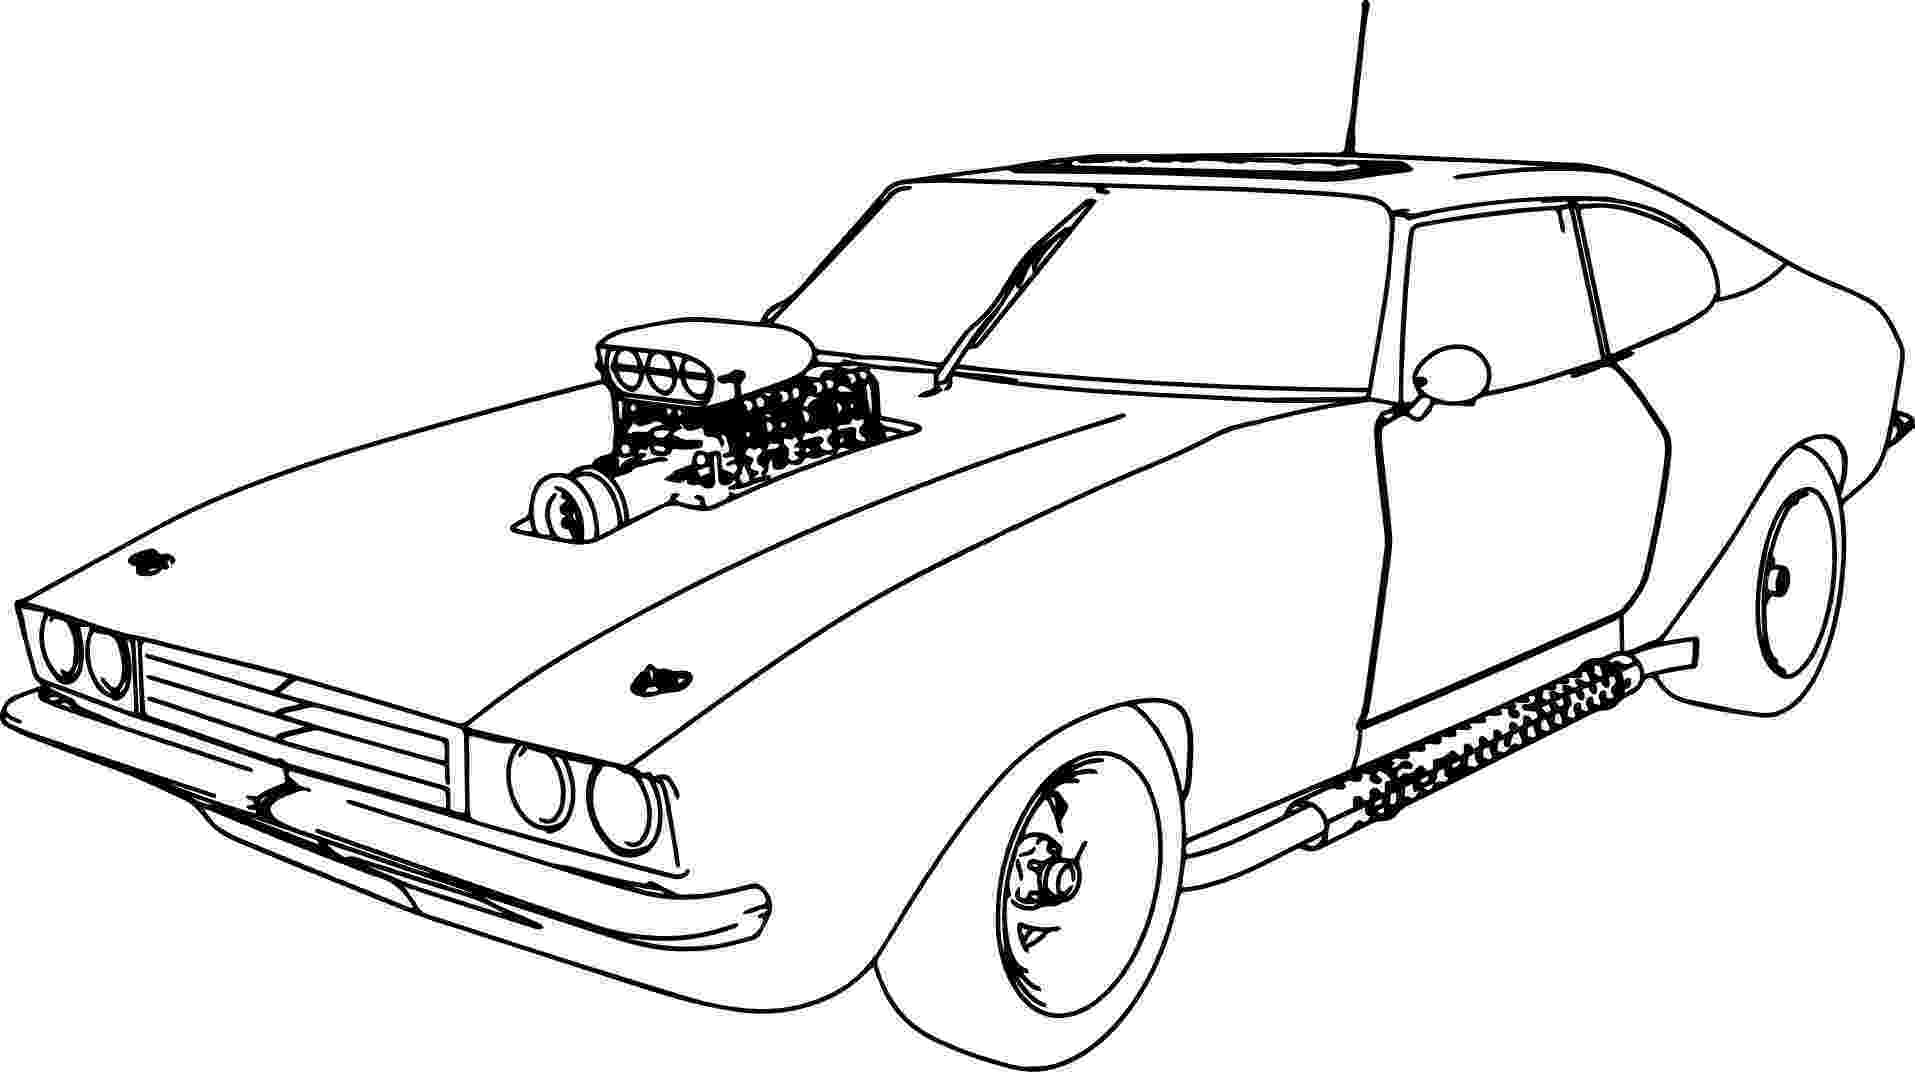 car coloring pages for adults car coloring pages for adults at getcoloringscom free coloring adults pages for car 